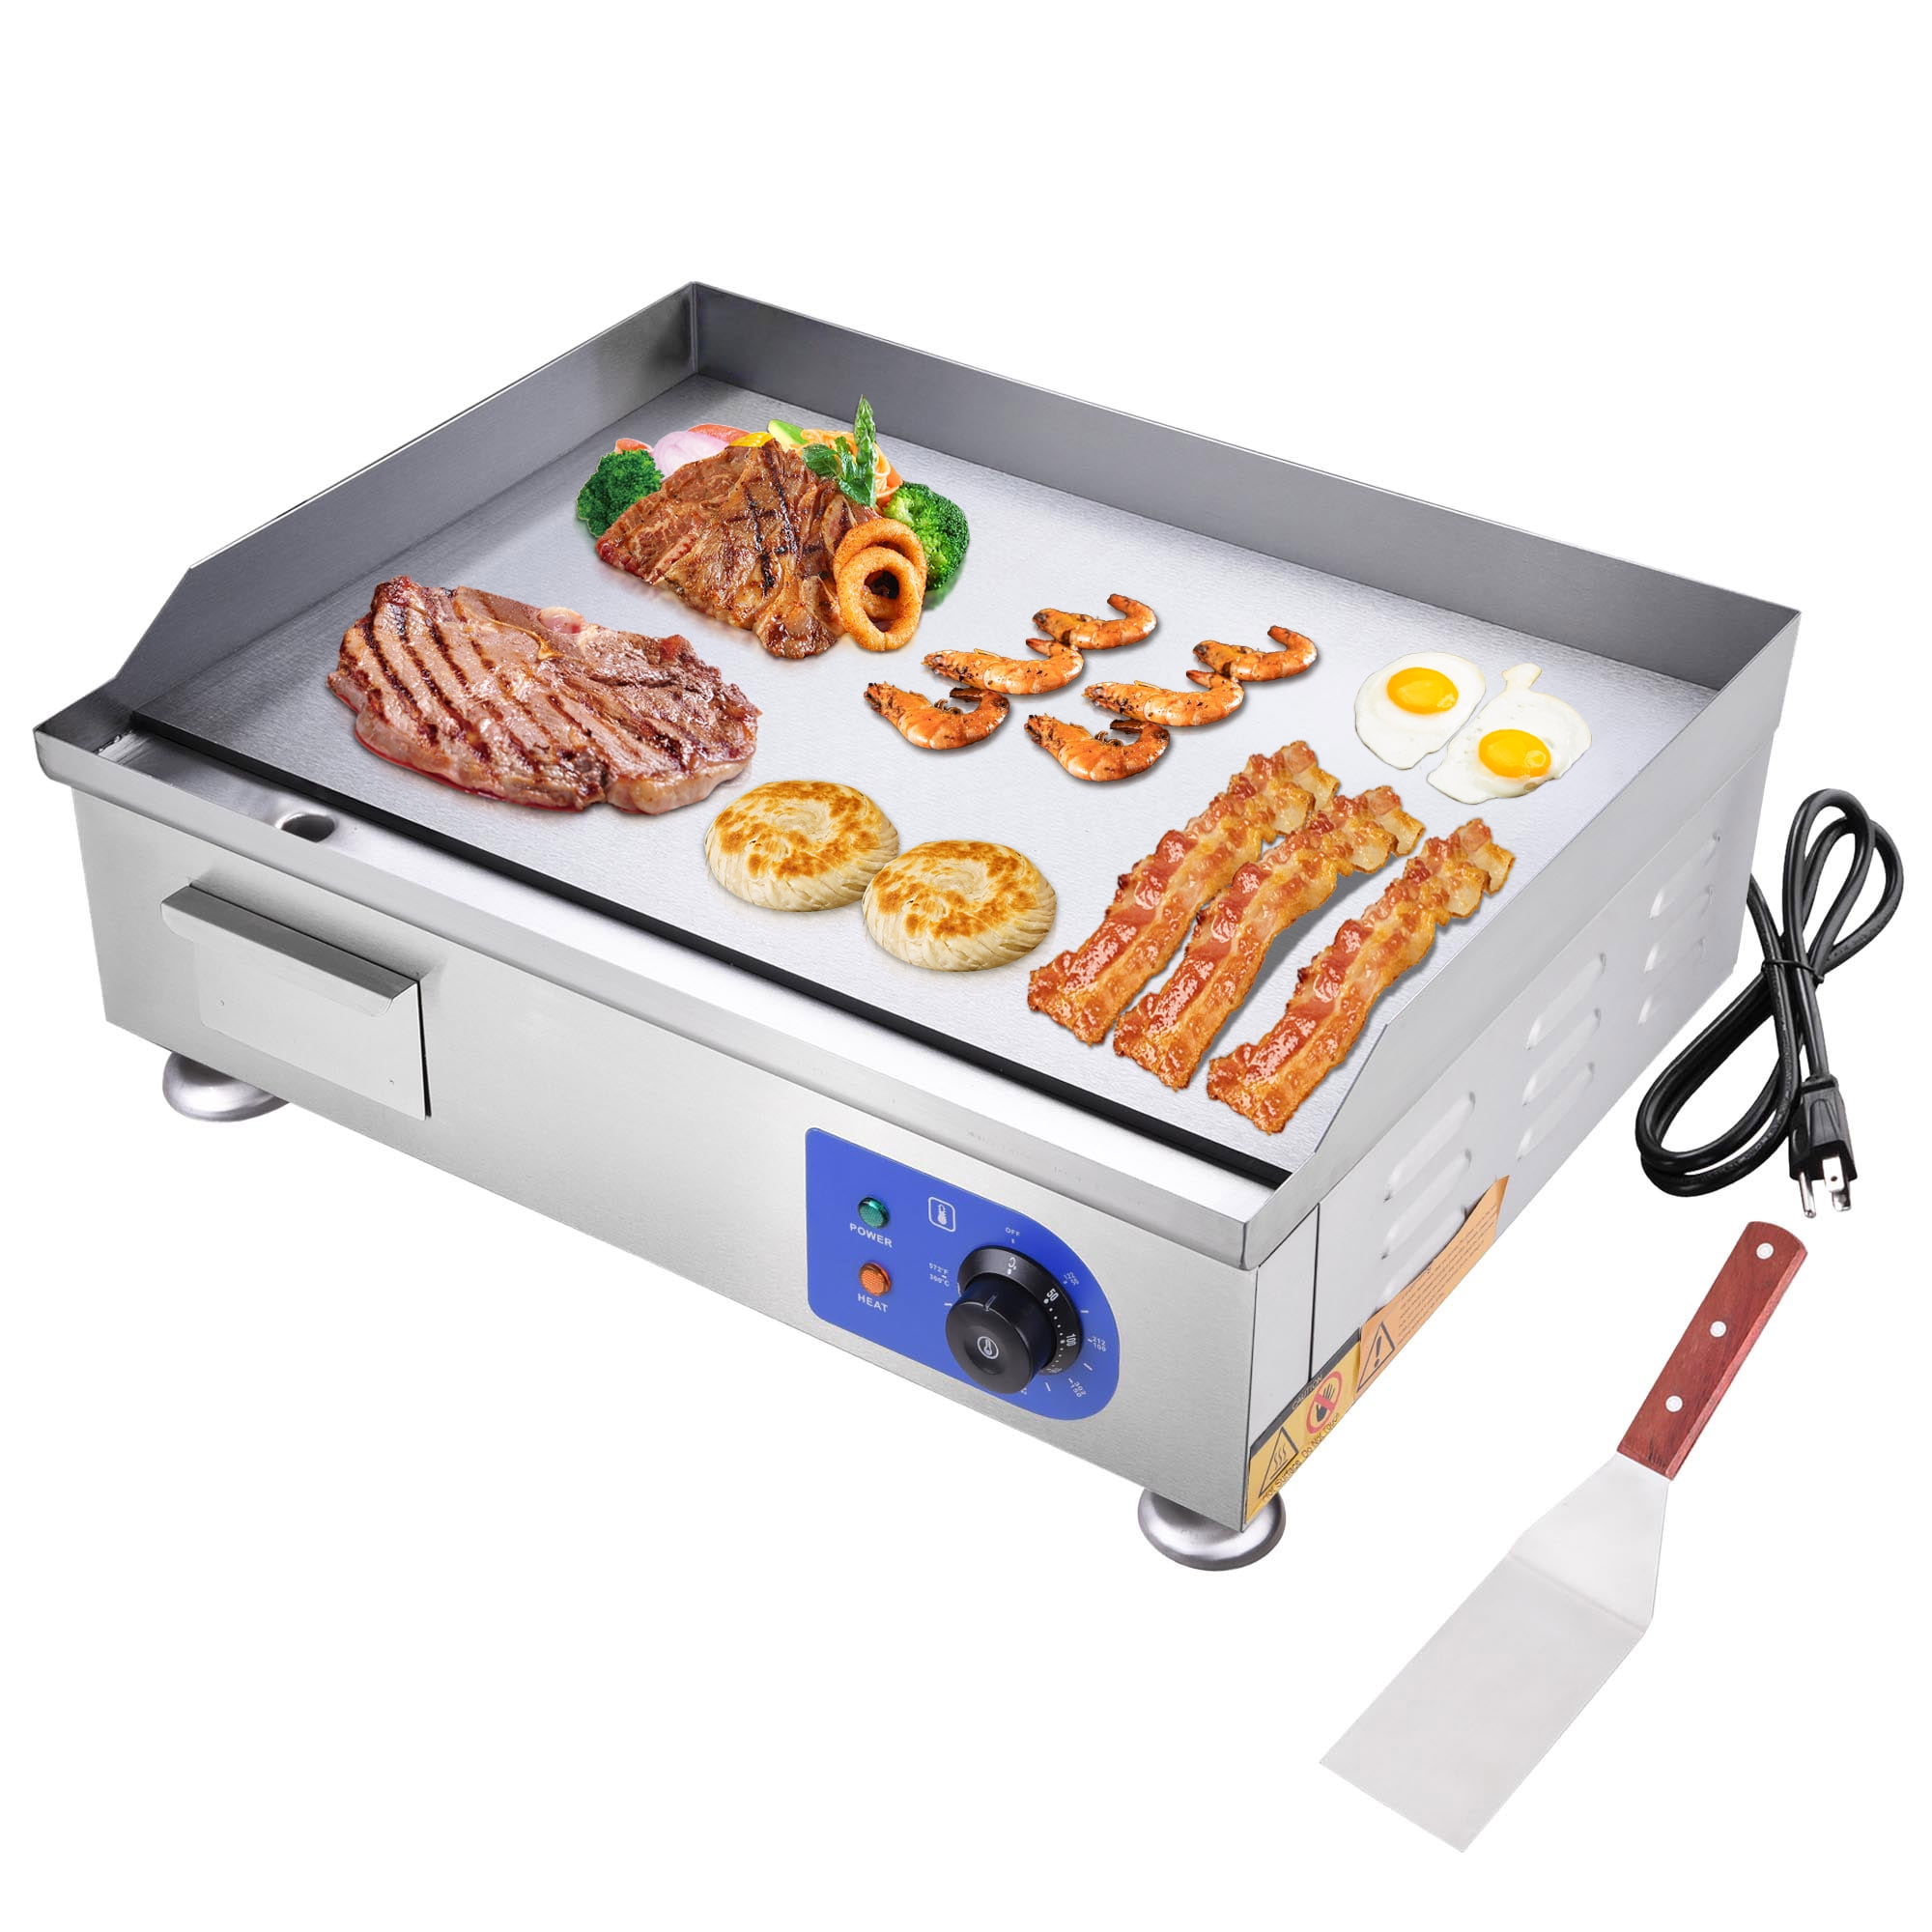 Avantco 24" Electric Commercial Countertop Steel Flat Top Griddle Grill 208/240V